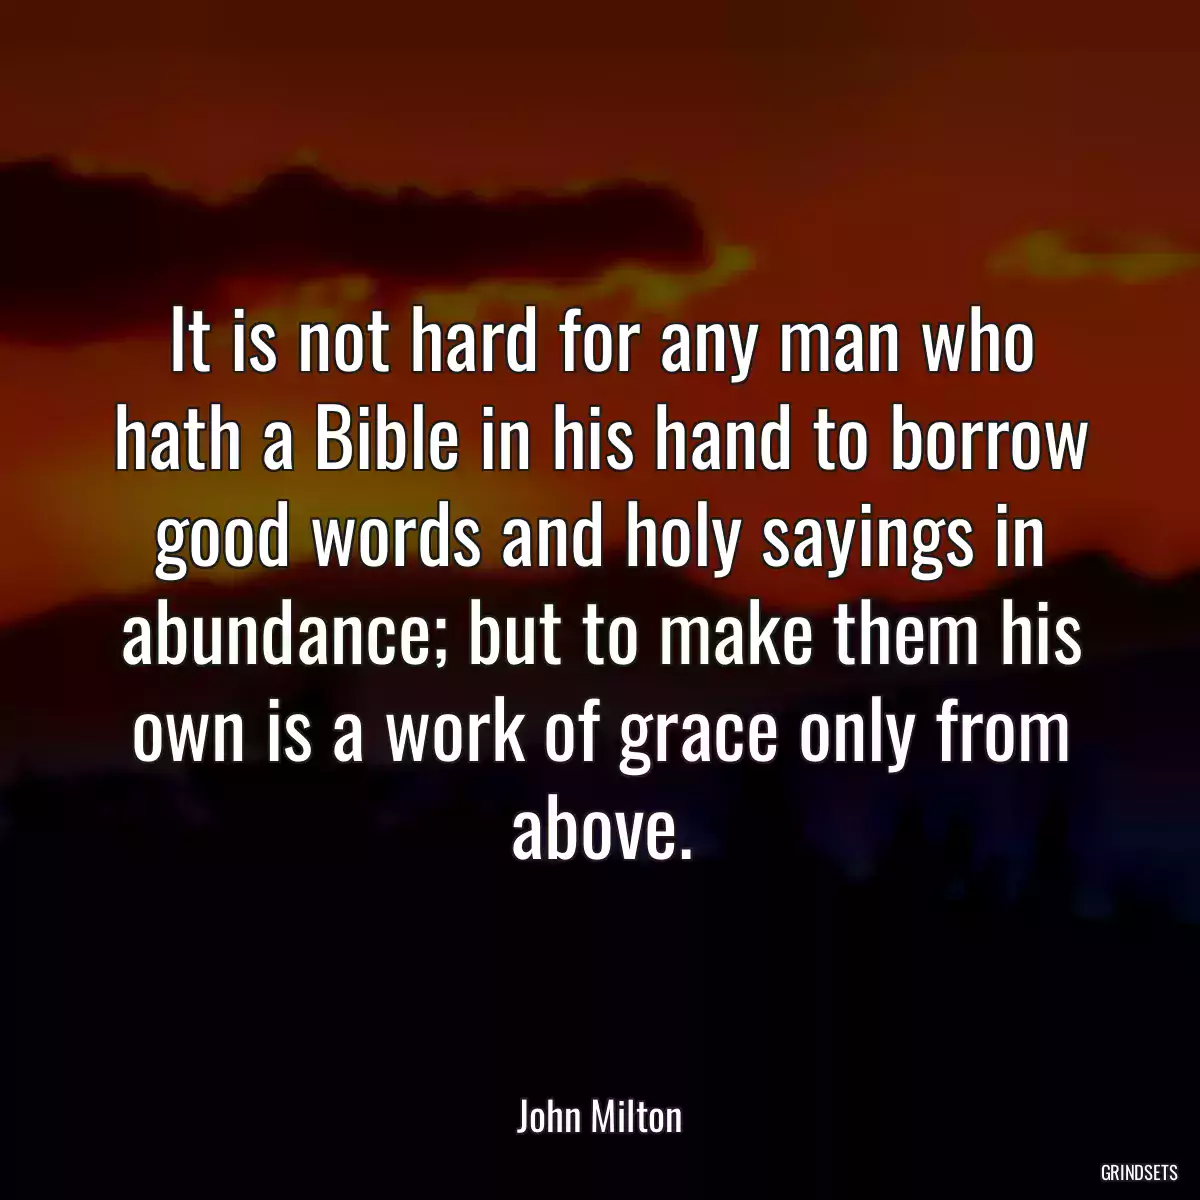 It is not hard for any man who hath a Bible in his hand to borrow good words and holy sayings in abundance; but to make them his own is a work of grace only from above.